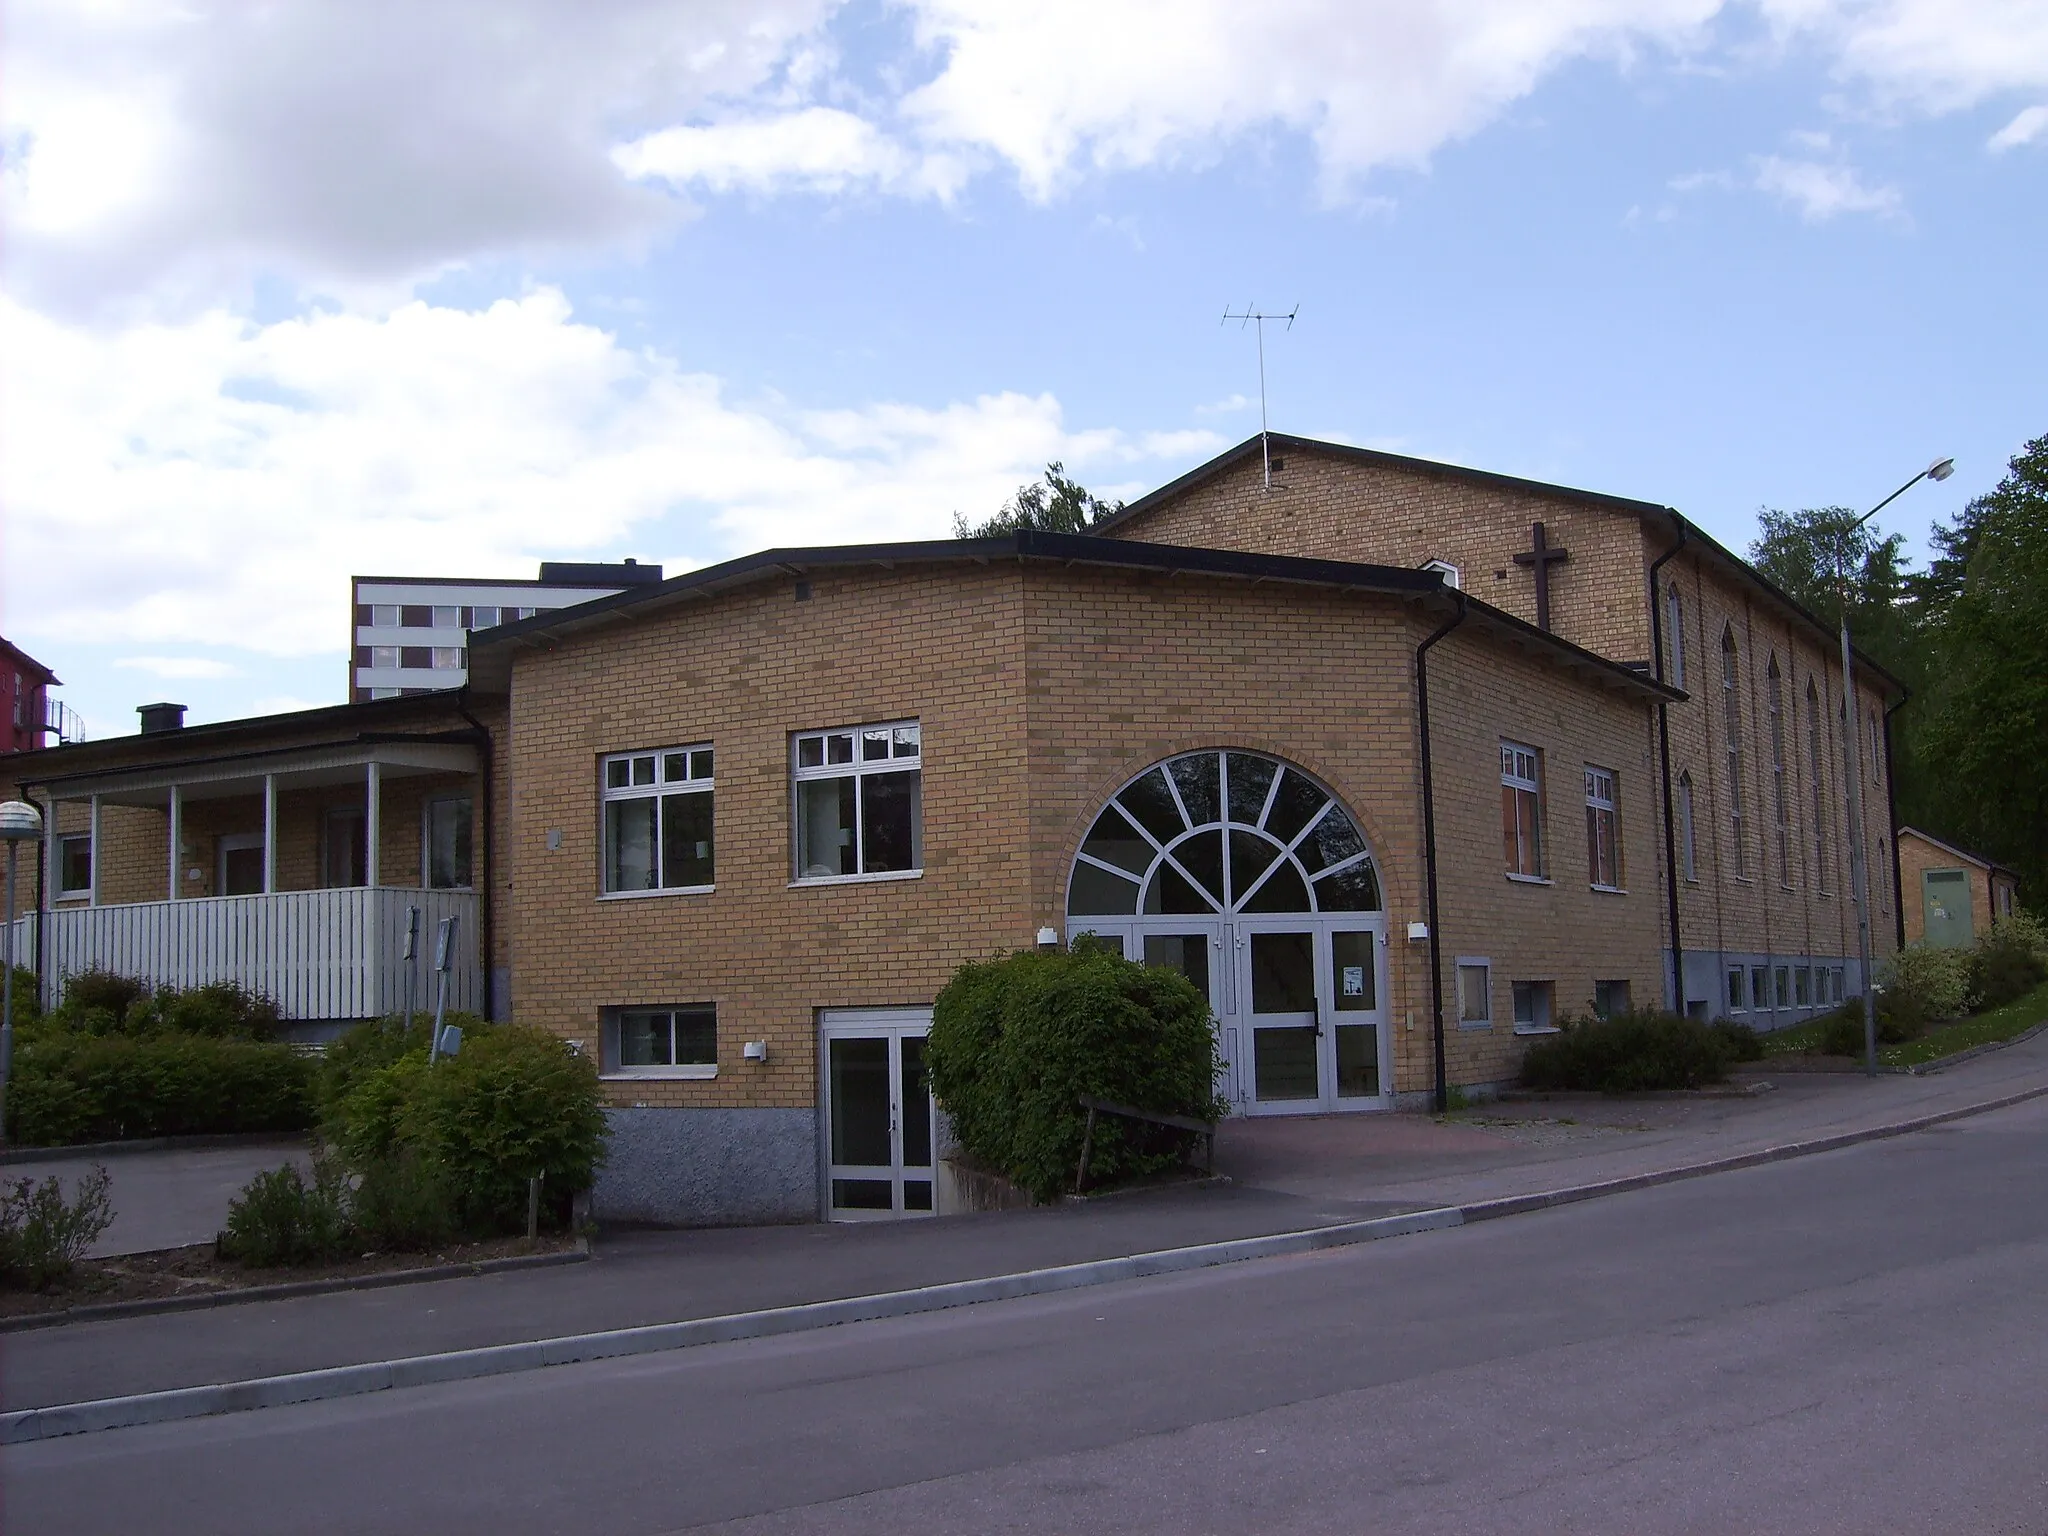 Photo showing: The Pentecostal church in Mjölby.